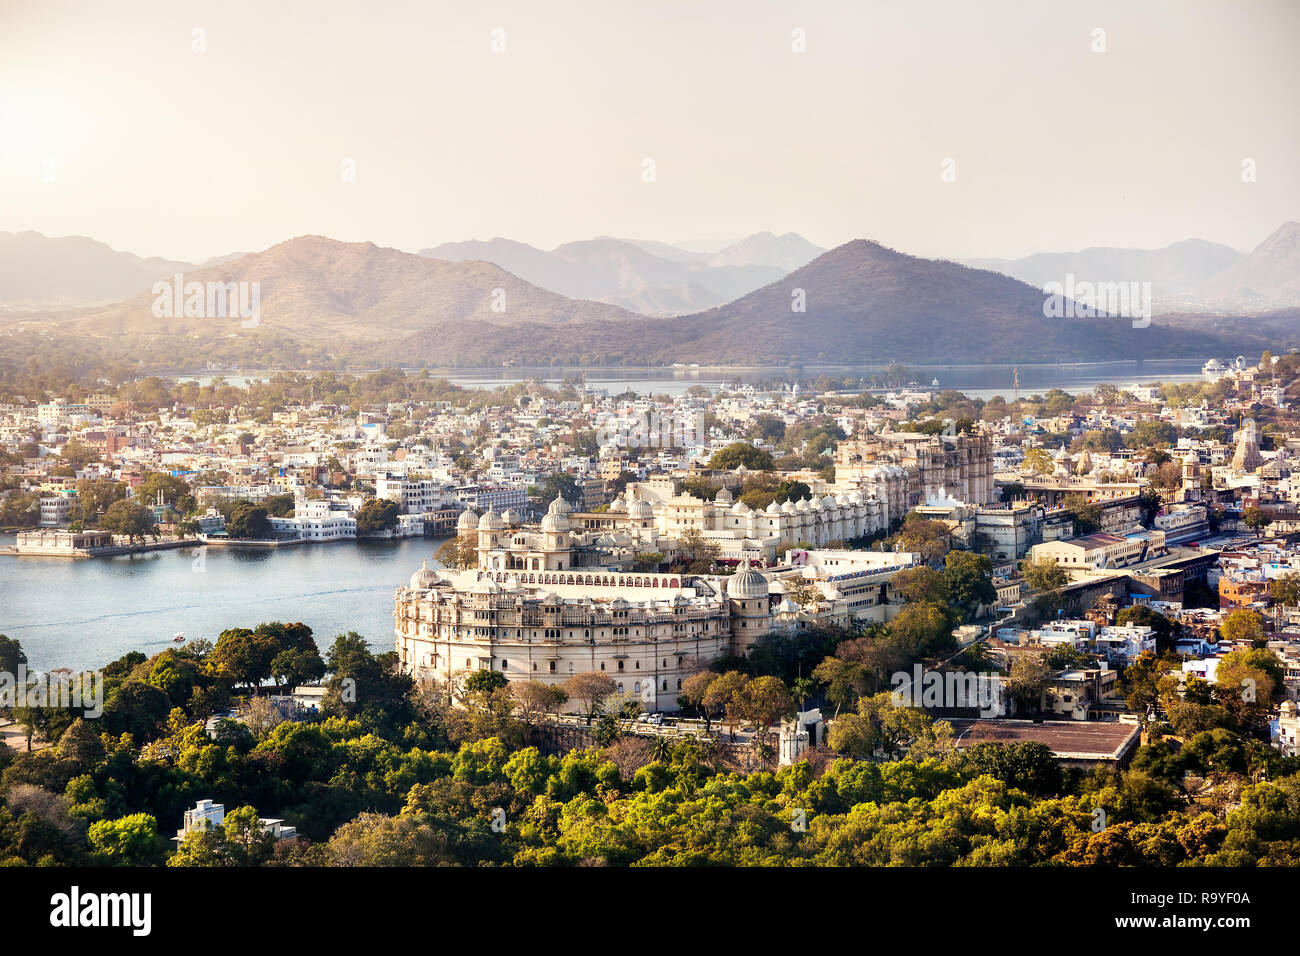 See Pichola mit City Palace in Udaipur, Rajasthan, Indien Stockfoto